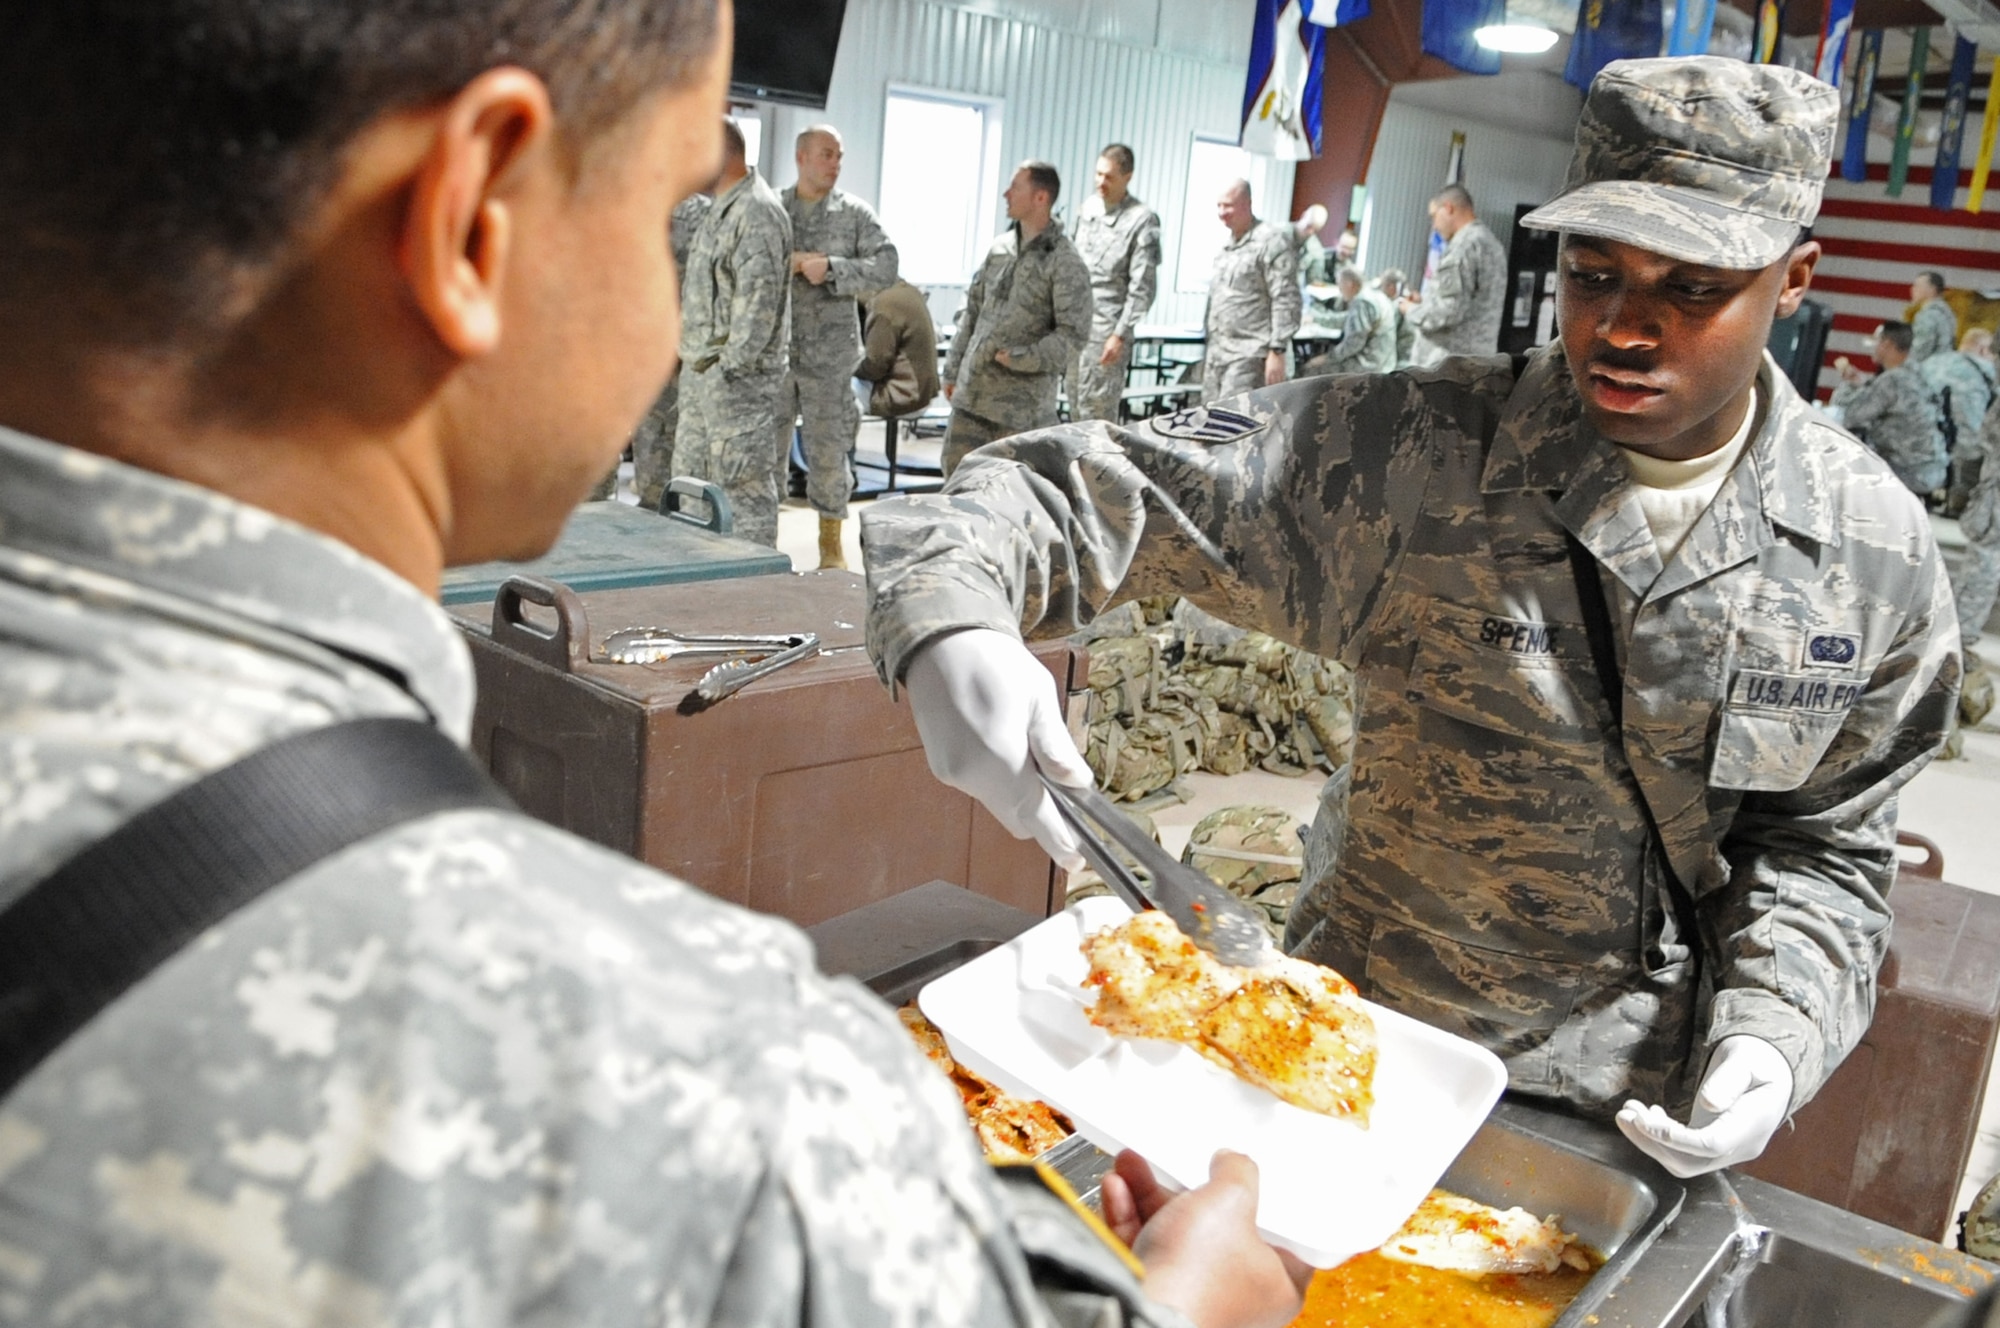 Senior Airman Leon Spence serves hot chow to a member of Provincial Reconstruction Team Paktya during a field training event. PRT Paktya Warriors are scheduled to deploy in support of Operation Enduring Freedom this summer. (U.S. Air Force photo/ Senior Airman Wesley Farnsworth) 